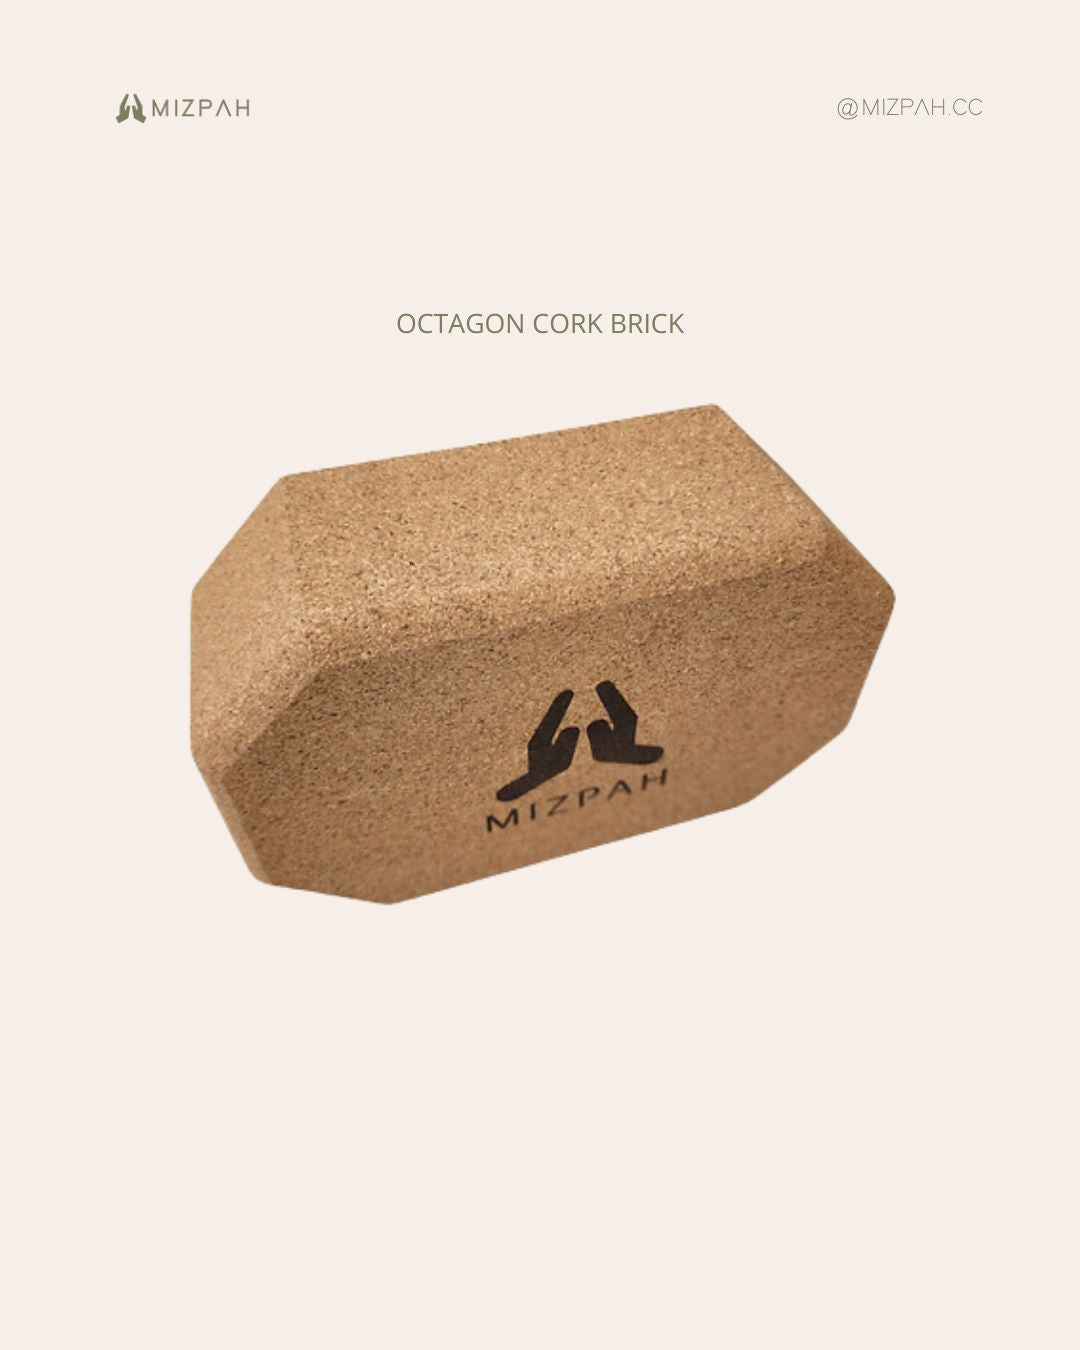 The Octagon Cork Brick is designed for smooth transitions and weighted for stability, the block’s extra angles allow for easy and smooth pose transitions